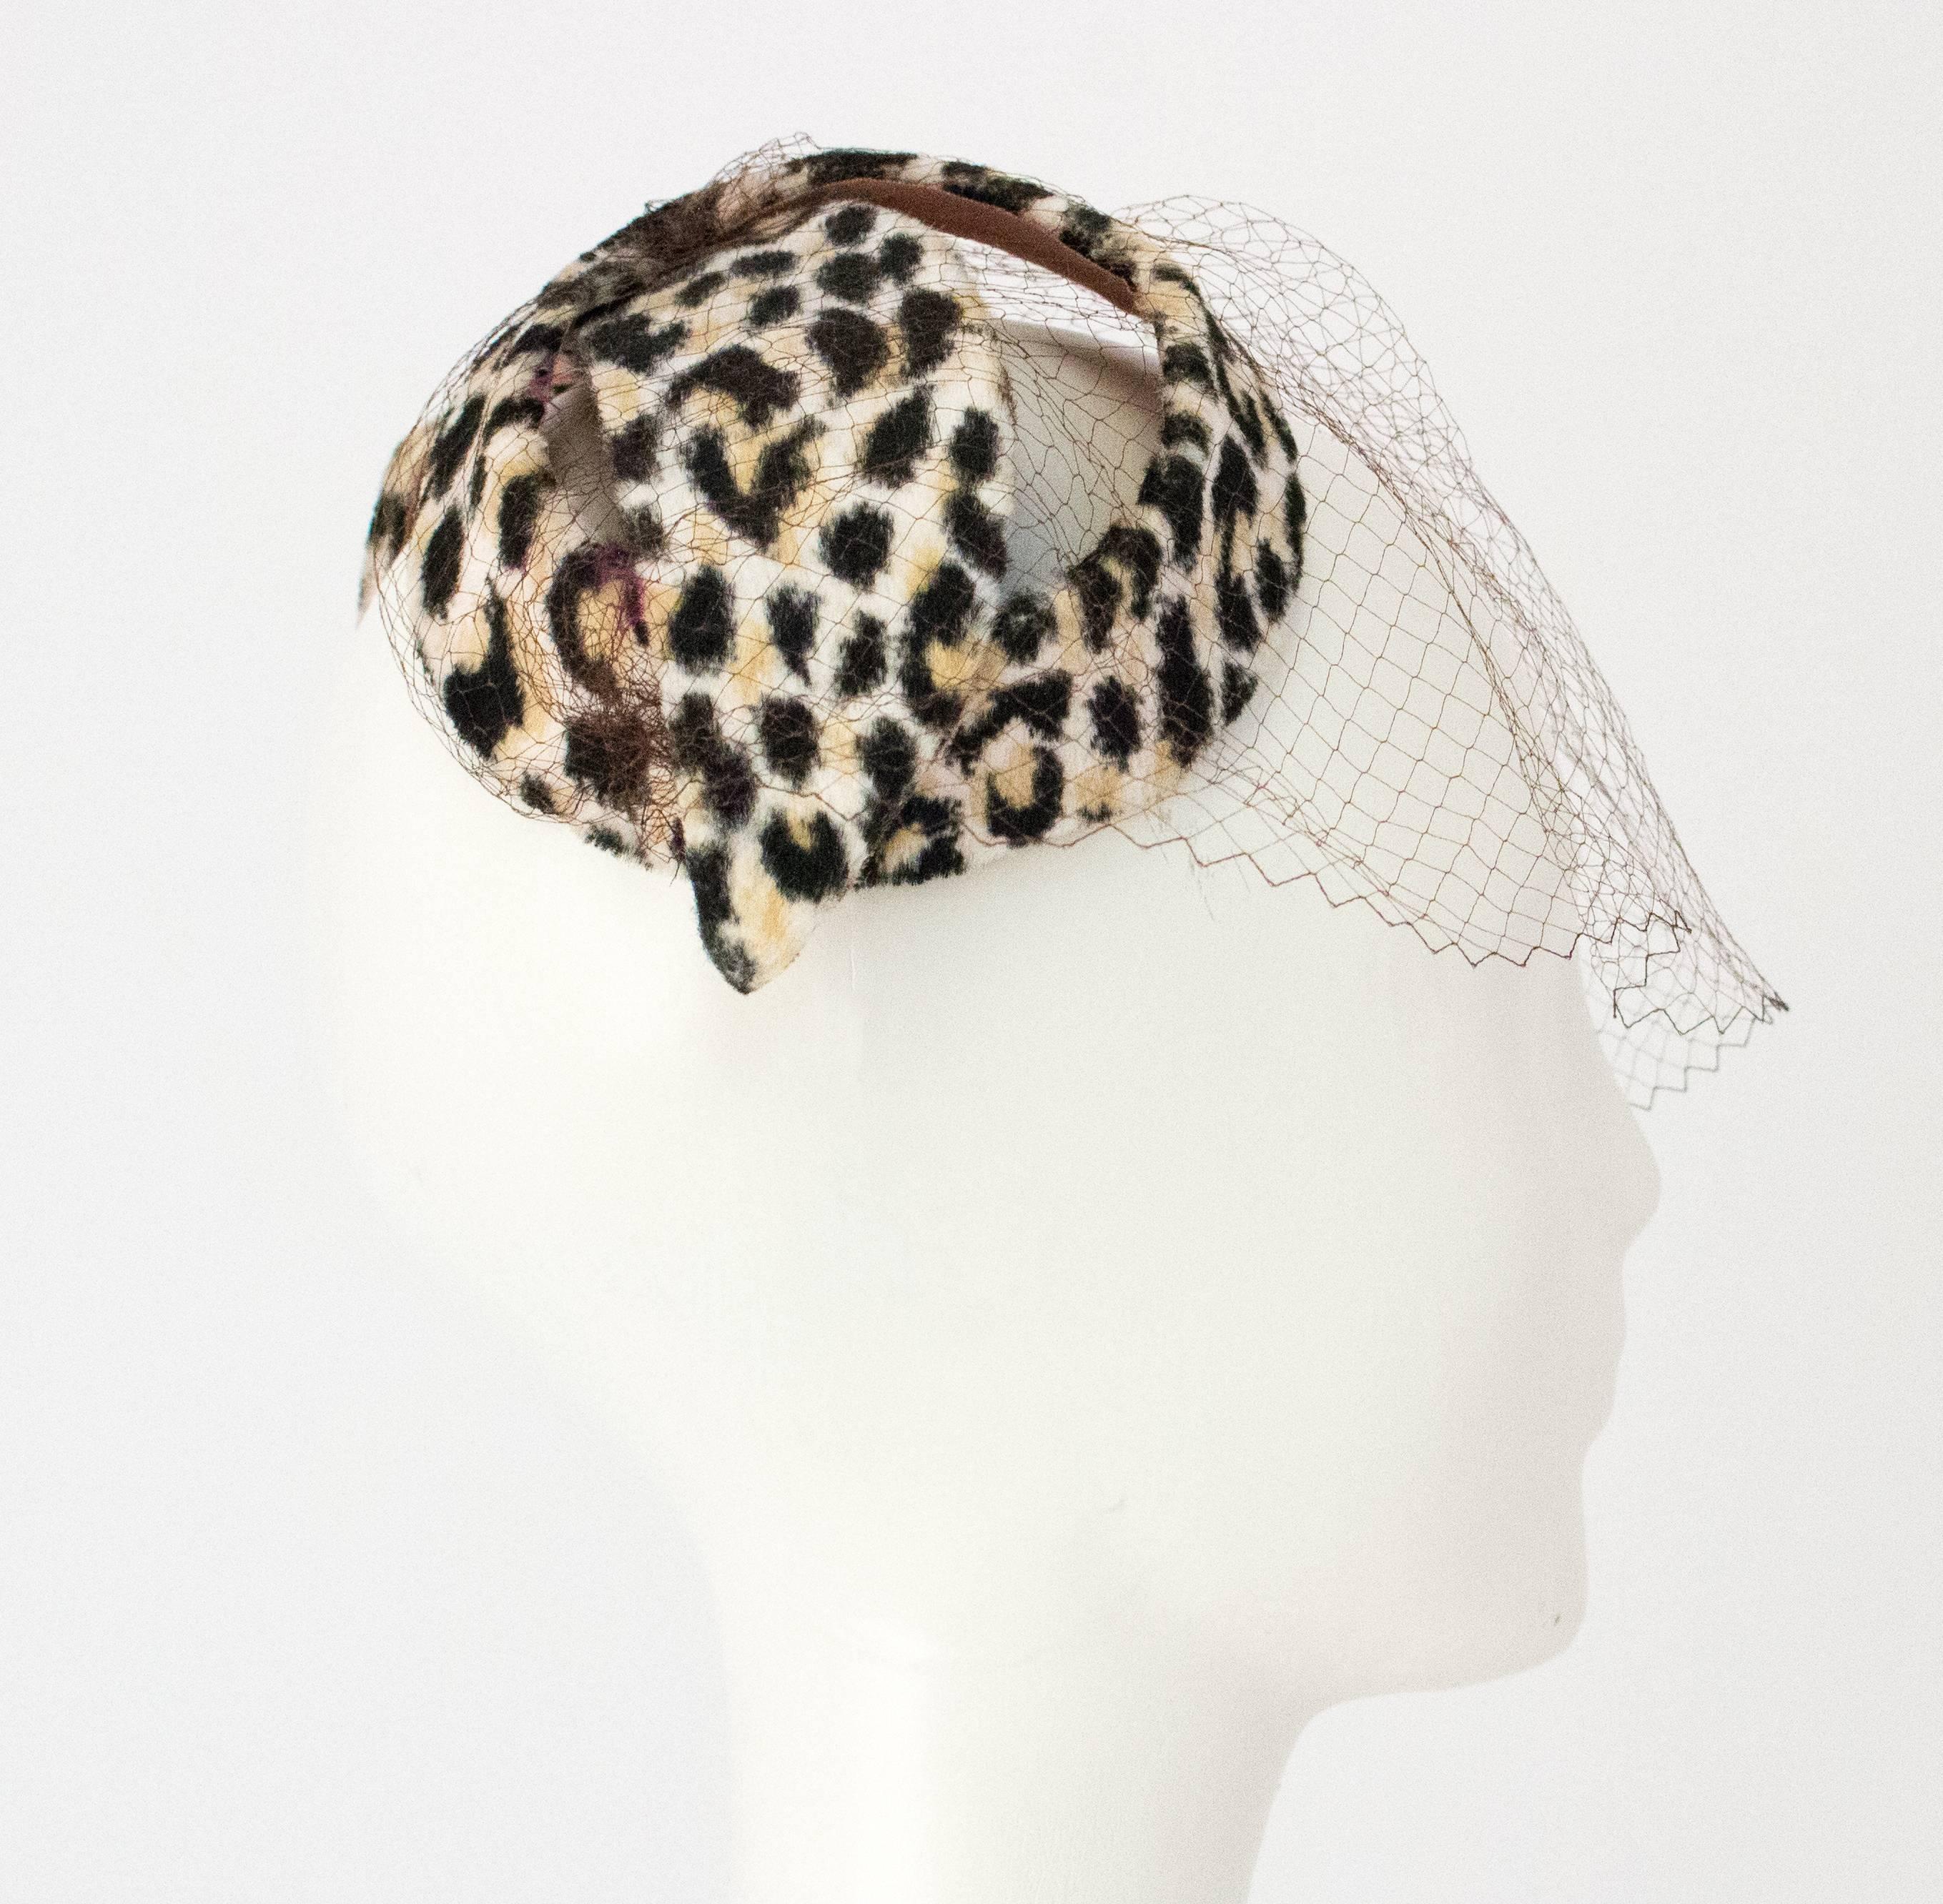 50s Velvet Leopard Print Bow Shaped Hat with Net. Net is a very dark brown. The hat has been shaped into the bow, and is not soft. 

Measurements:
Approx. 11 1/2 inches across 
Approx. 4 1/2 inches wide  